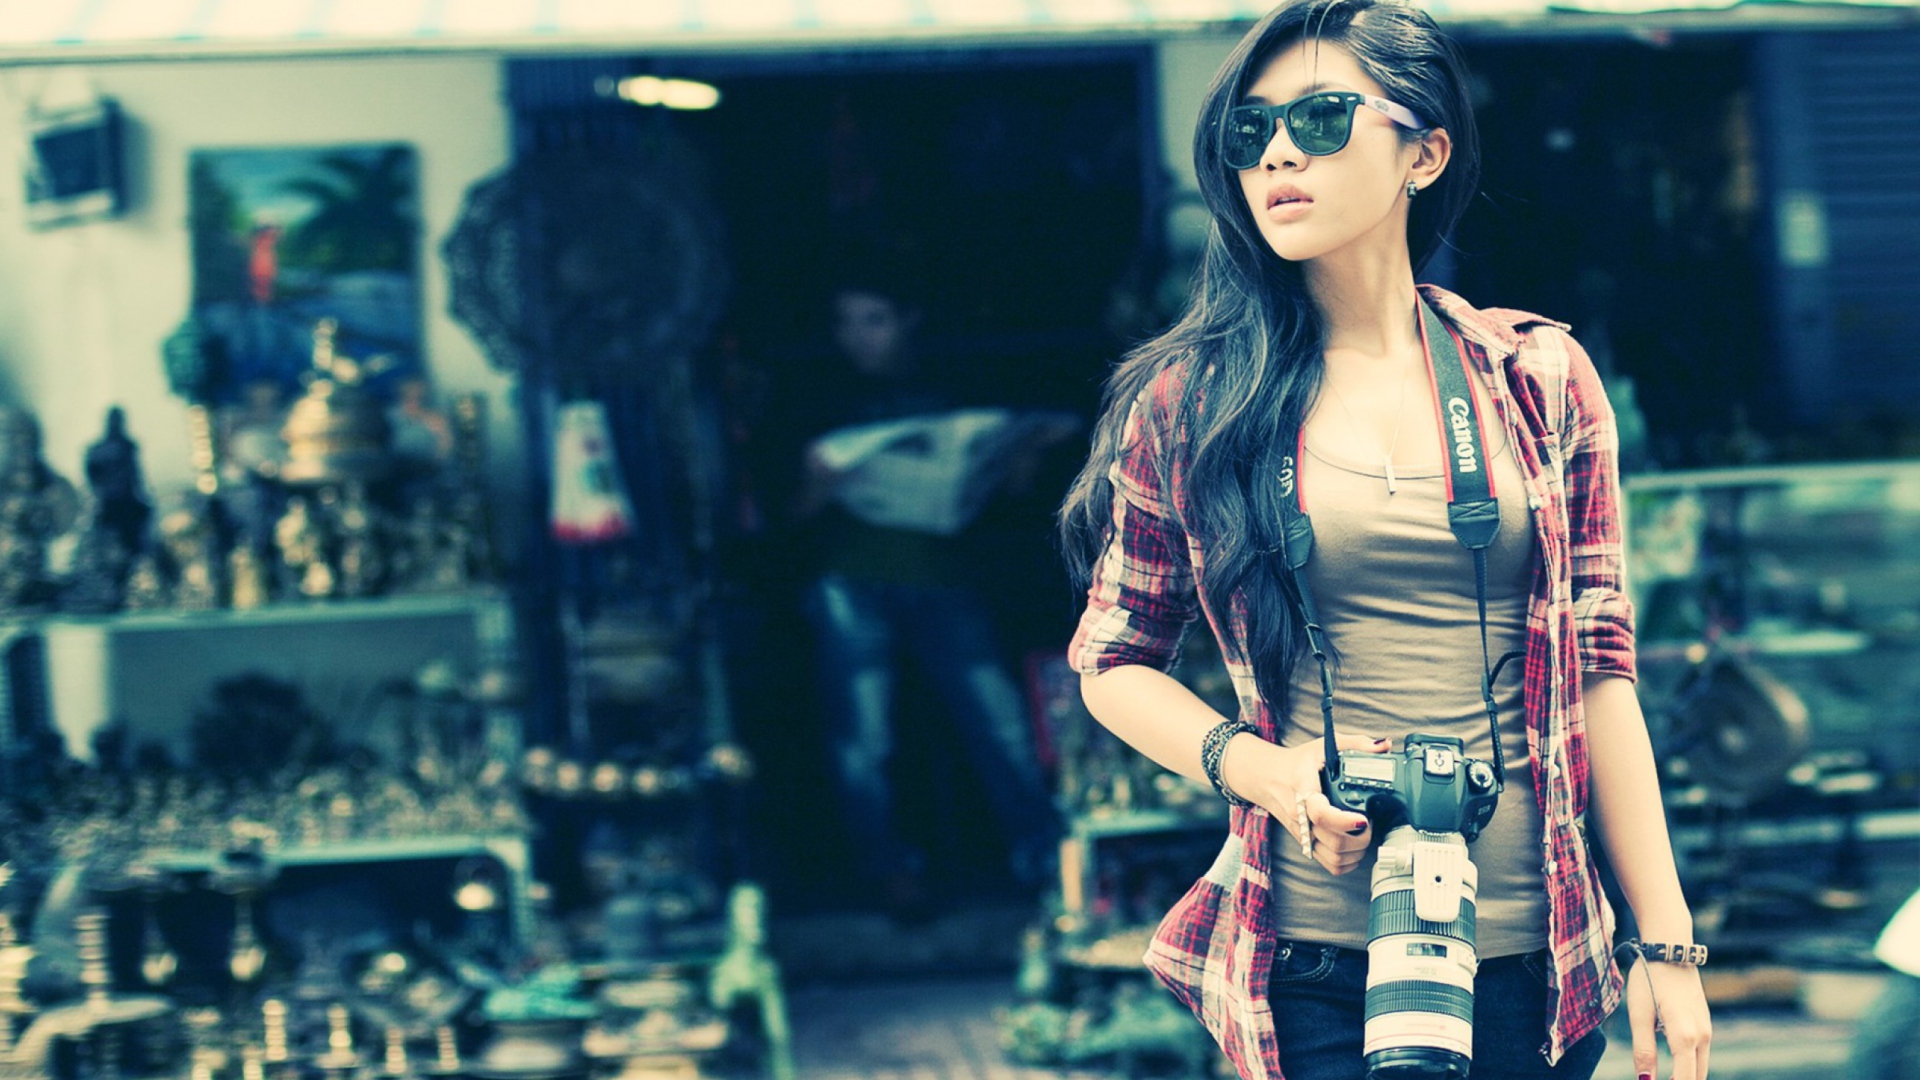 Brunette Asian Girl With Photo Camera wallpaper 1920x1080